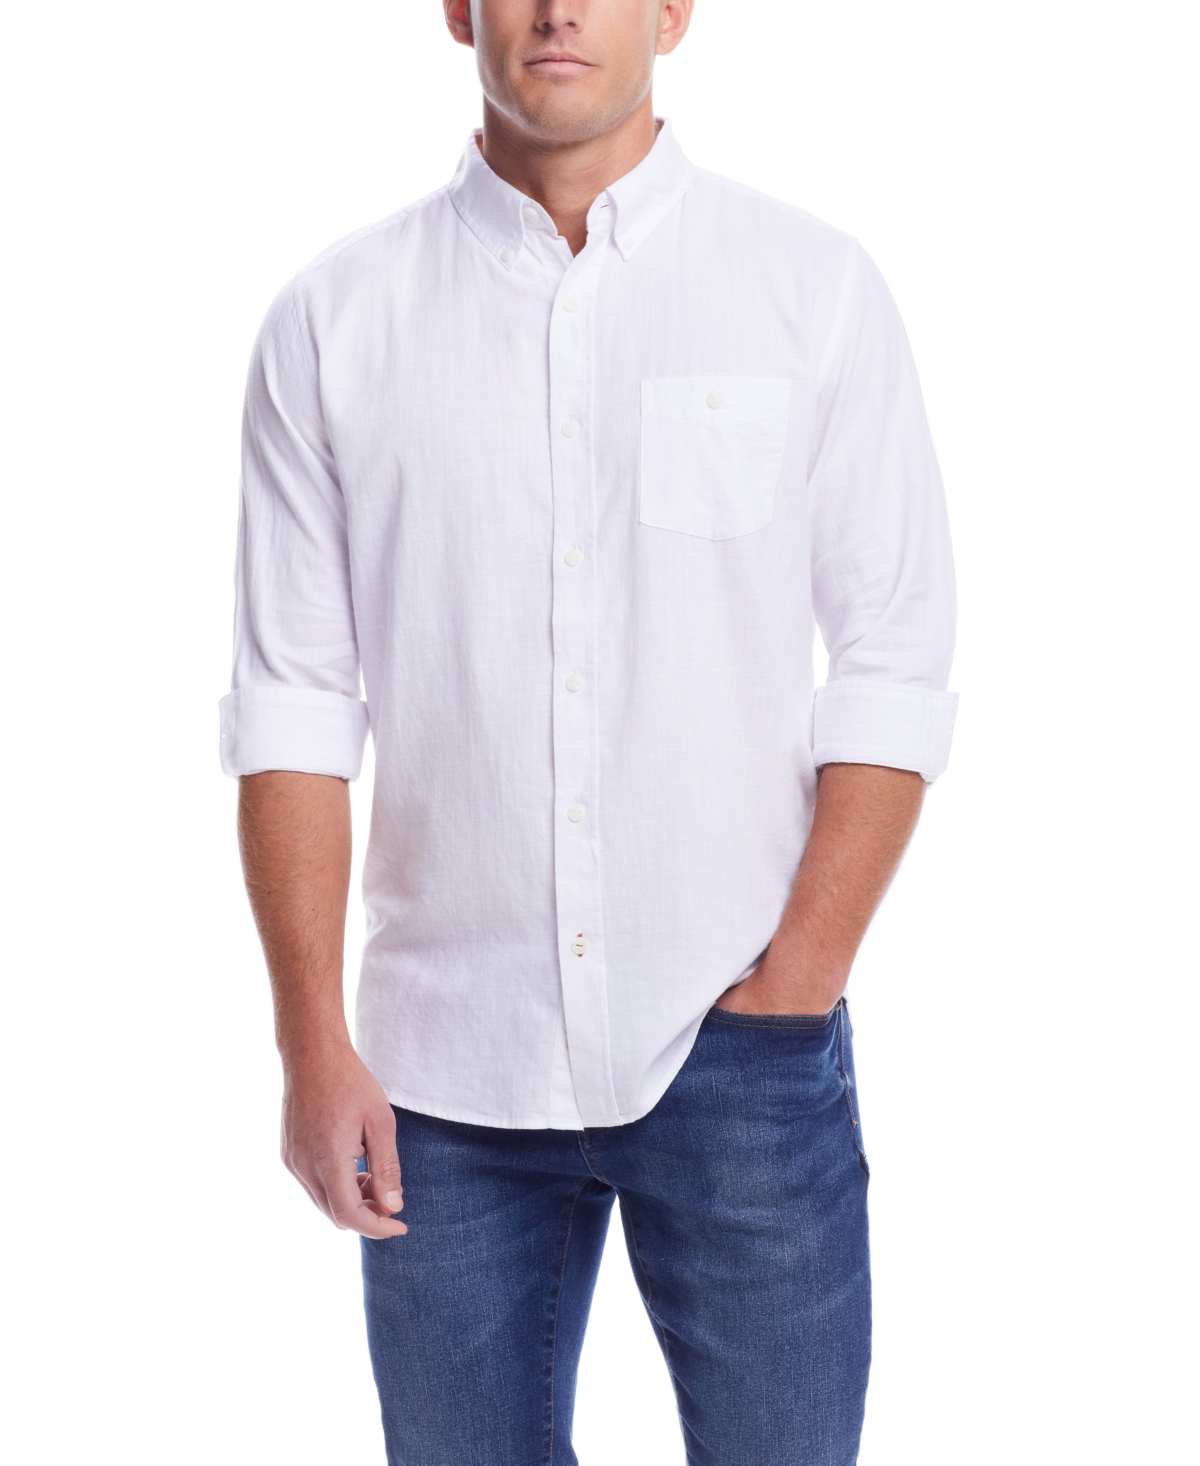 Weatherproof Vintage Men's Long Sleeve Solid Cotton Twill Shirt In White